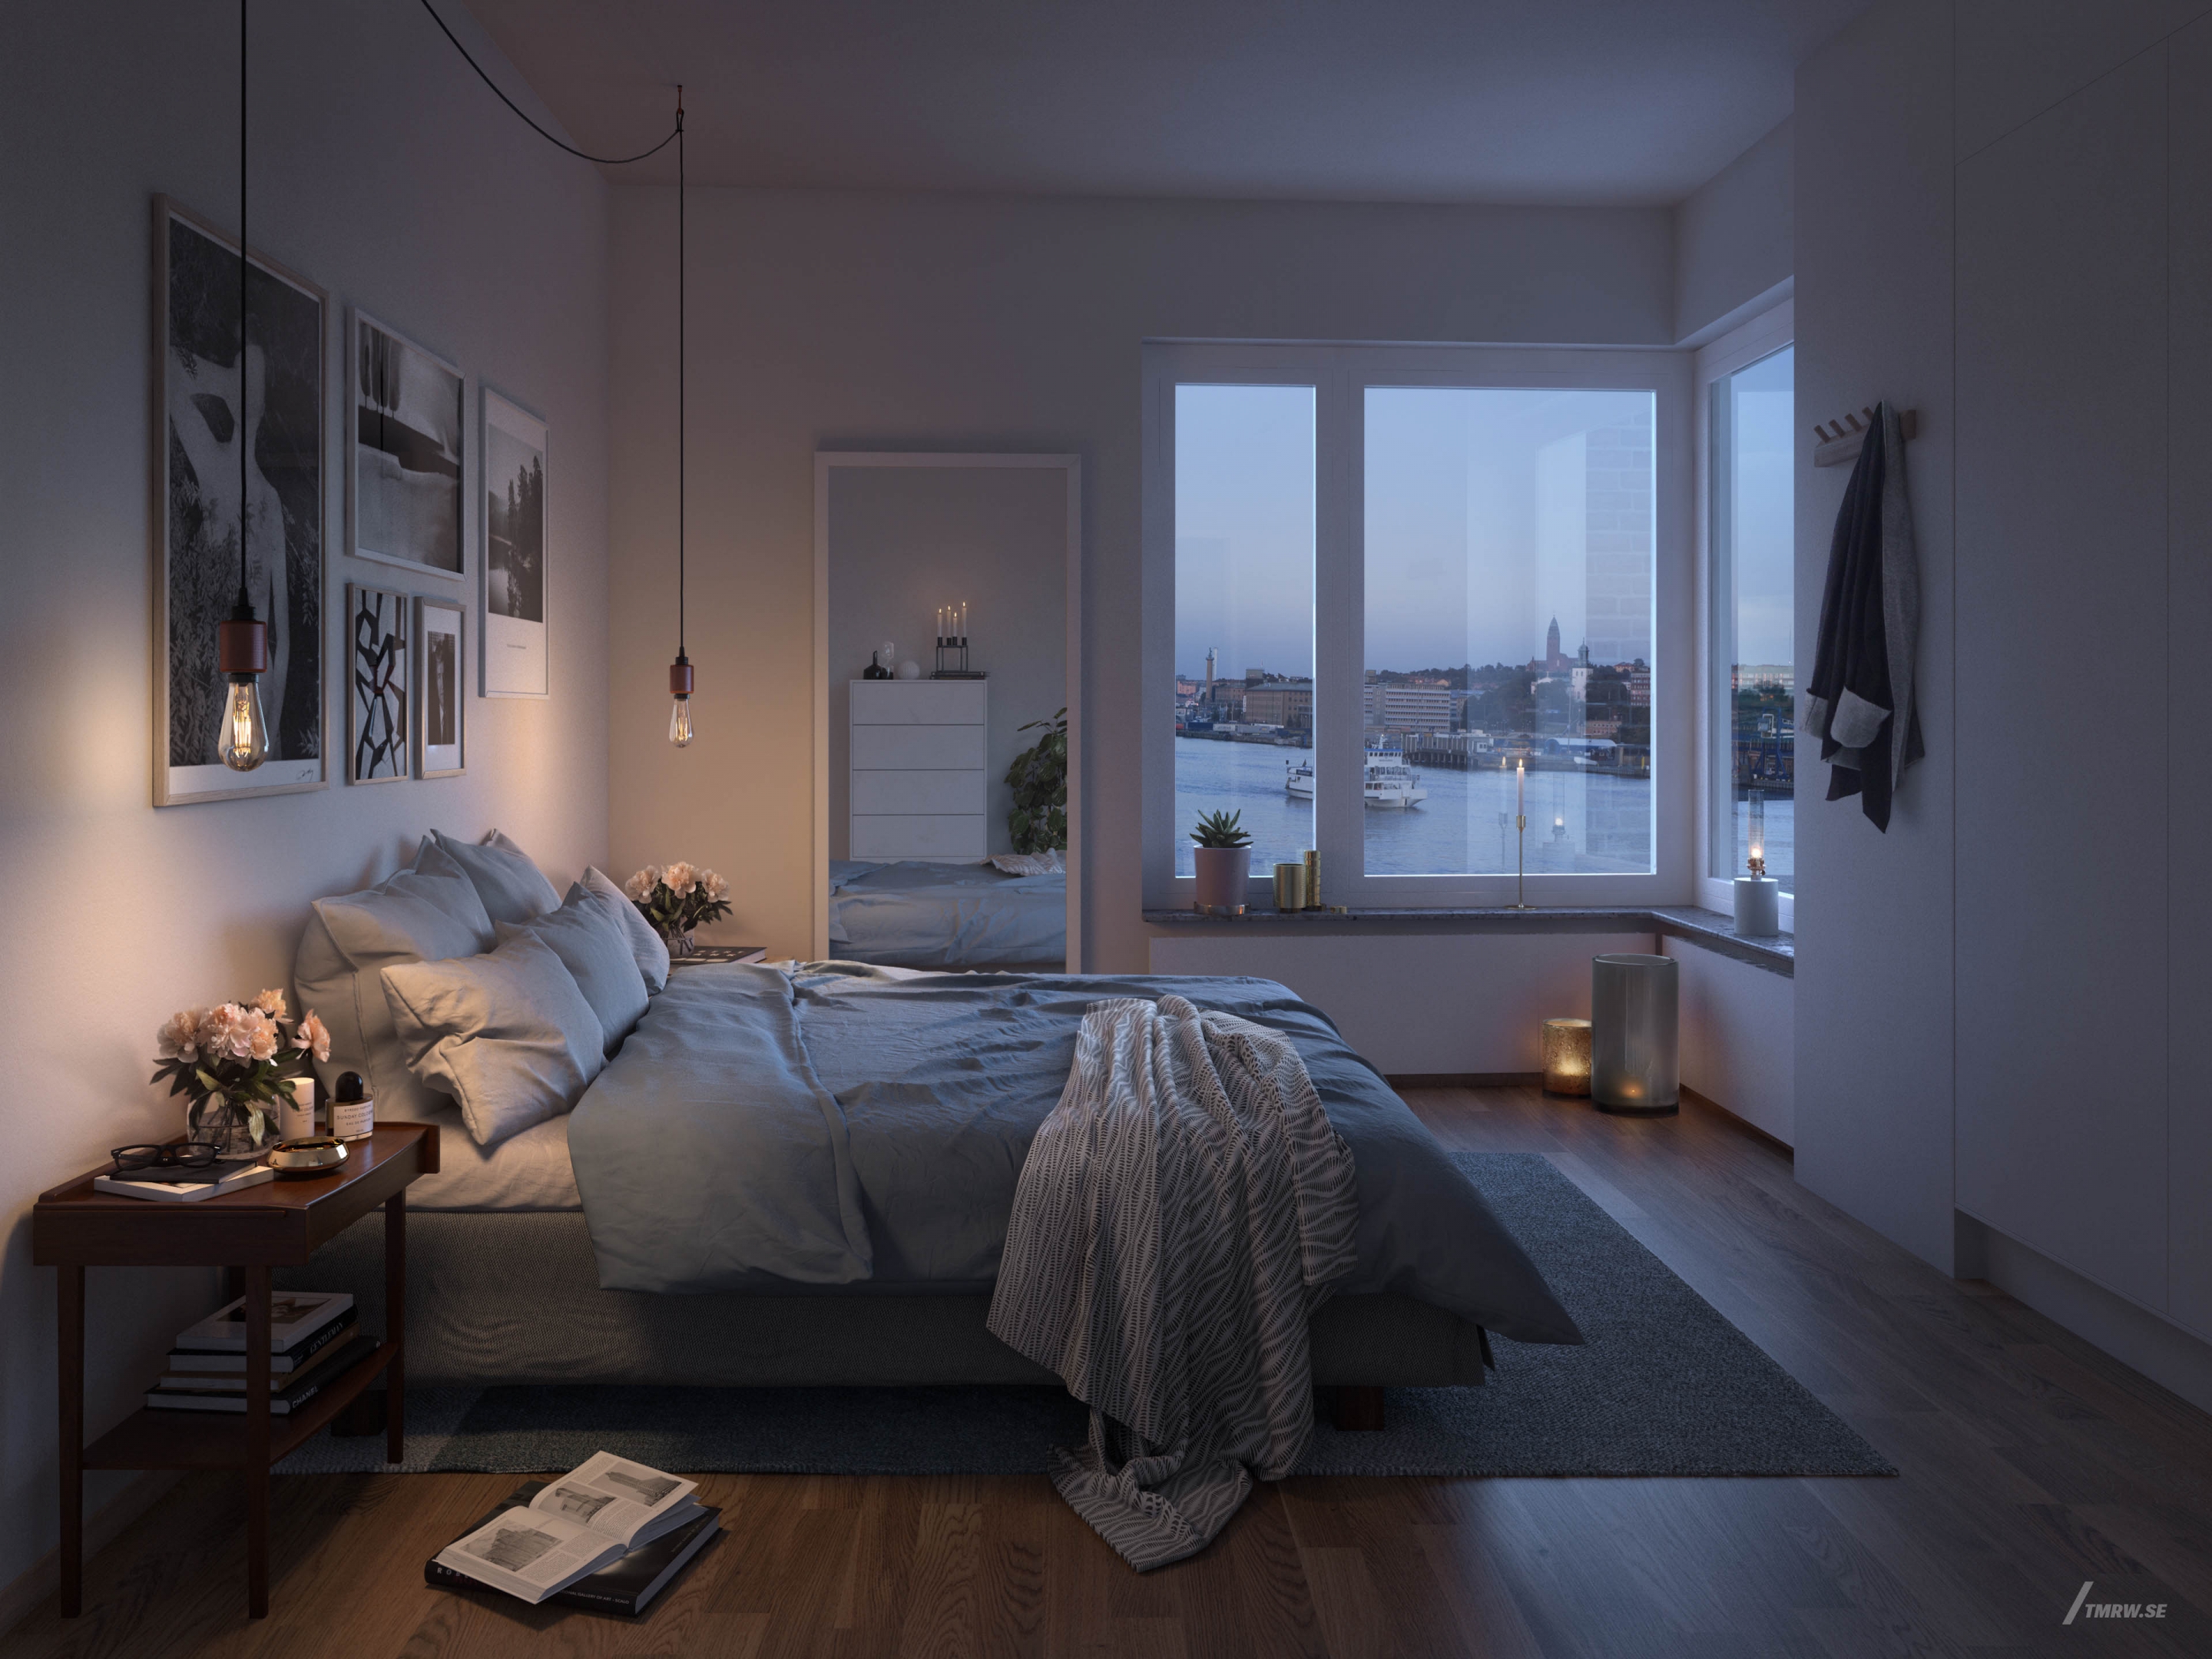 Architectural visualization of Skaftö for HSB, a bedroom a interior in evening light from an eye level view.